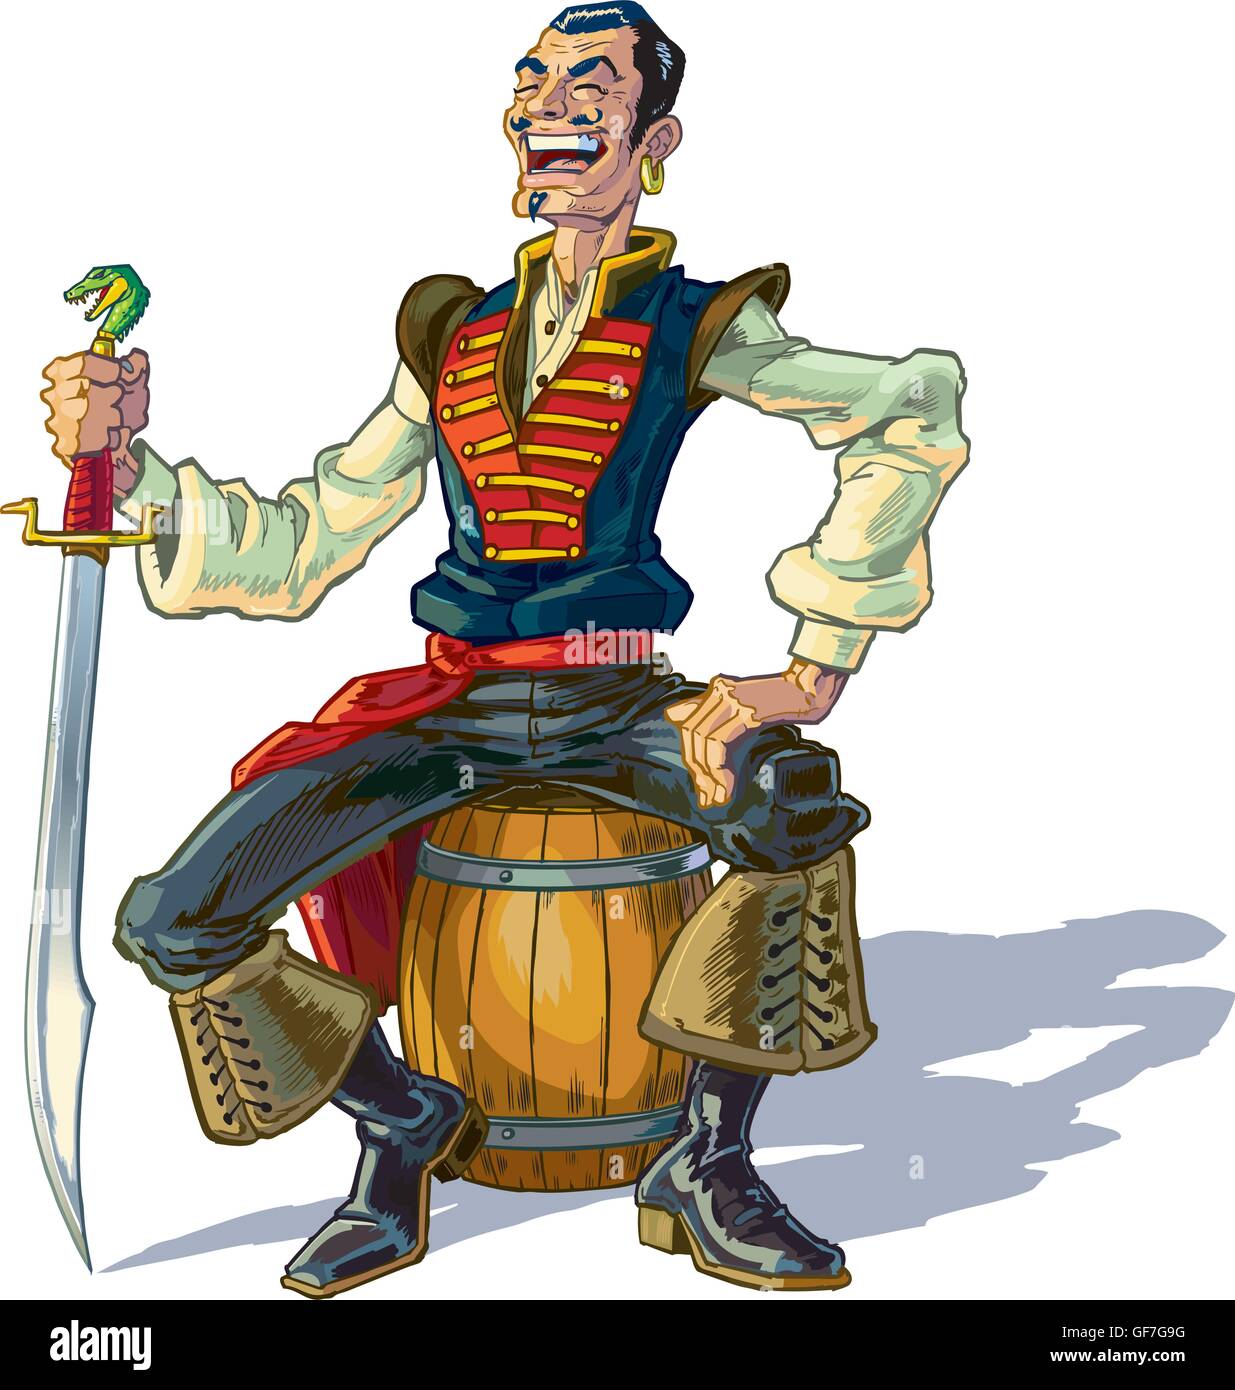 Vector cartoon clip art illustration of an Arabian sailor or pirate sitting on a barrel while laughing and holding a sword. Stock Vector